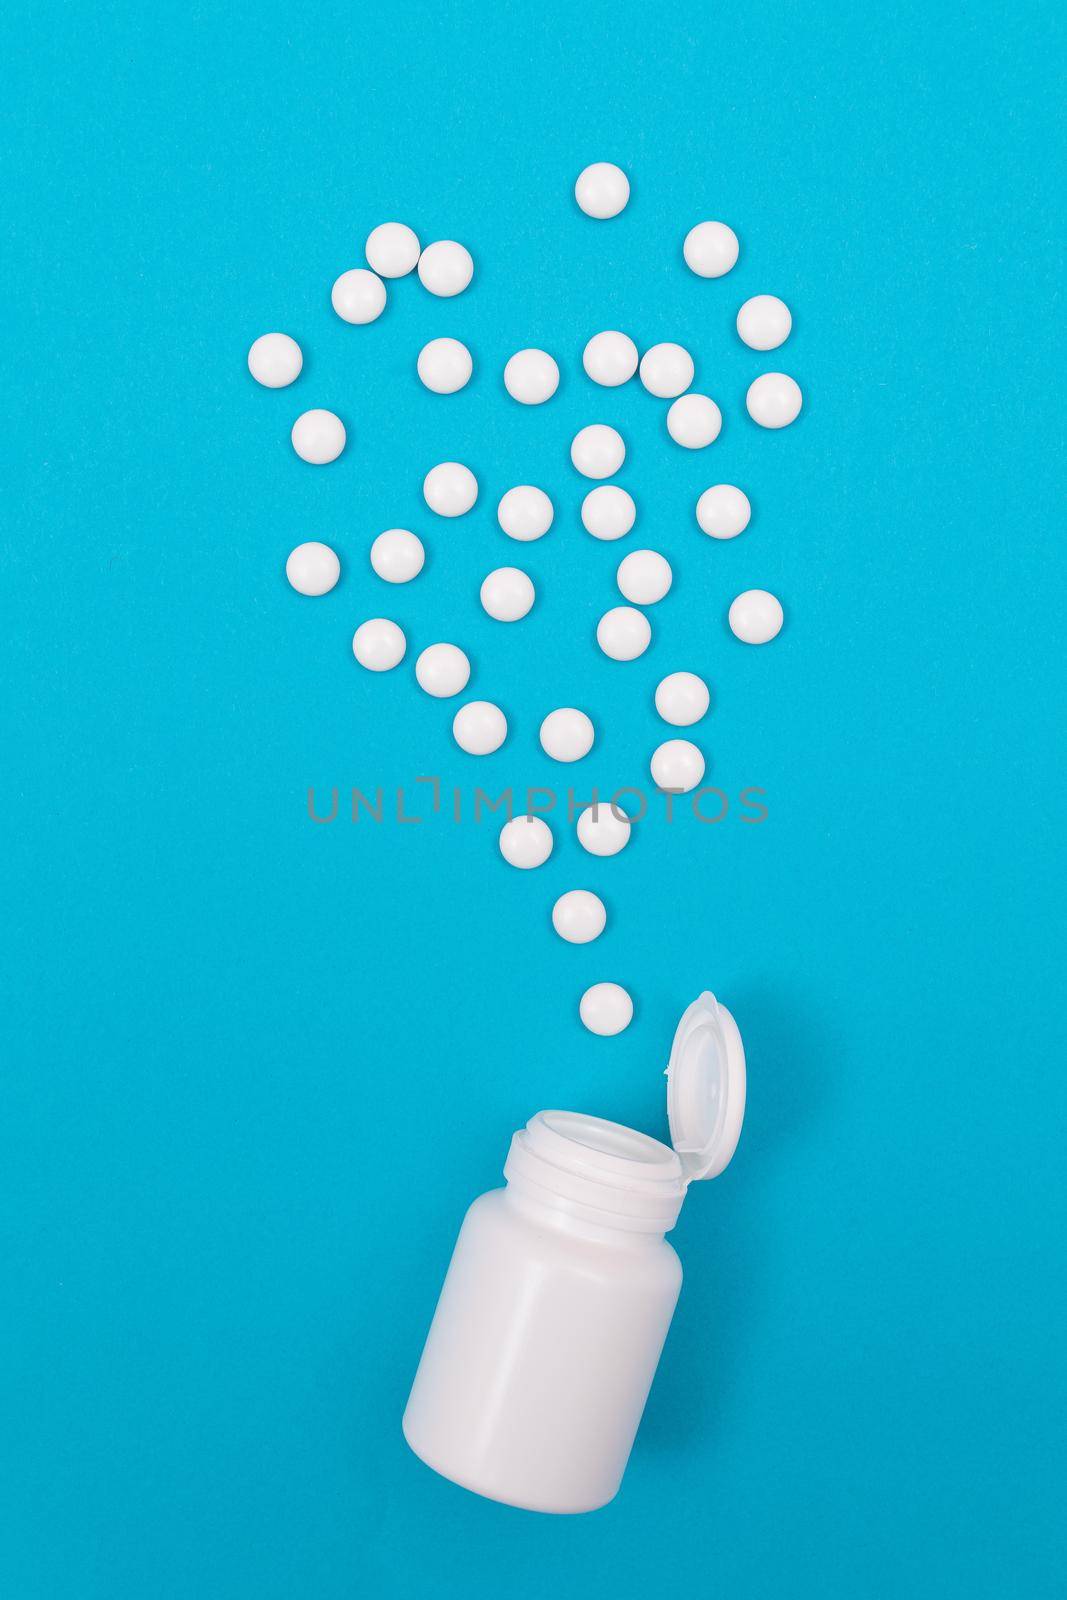 Global Pharmaceutical Industry and Medicinal Products - White Pills or Tablets Scattered from the Bottle, Lying on Blue Background, Top View, Flat Lay